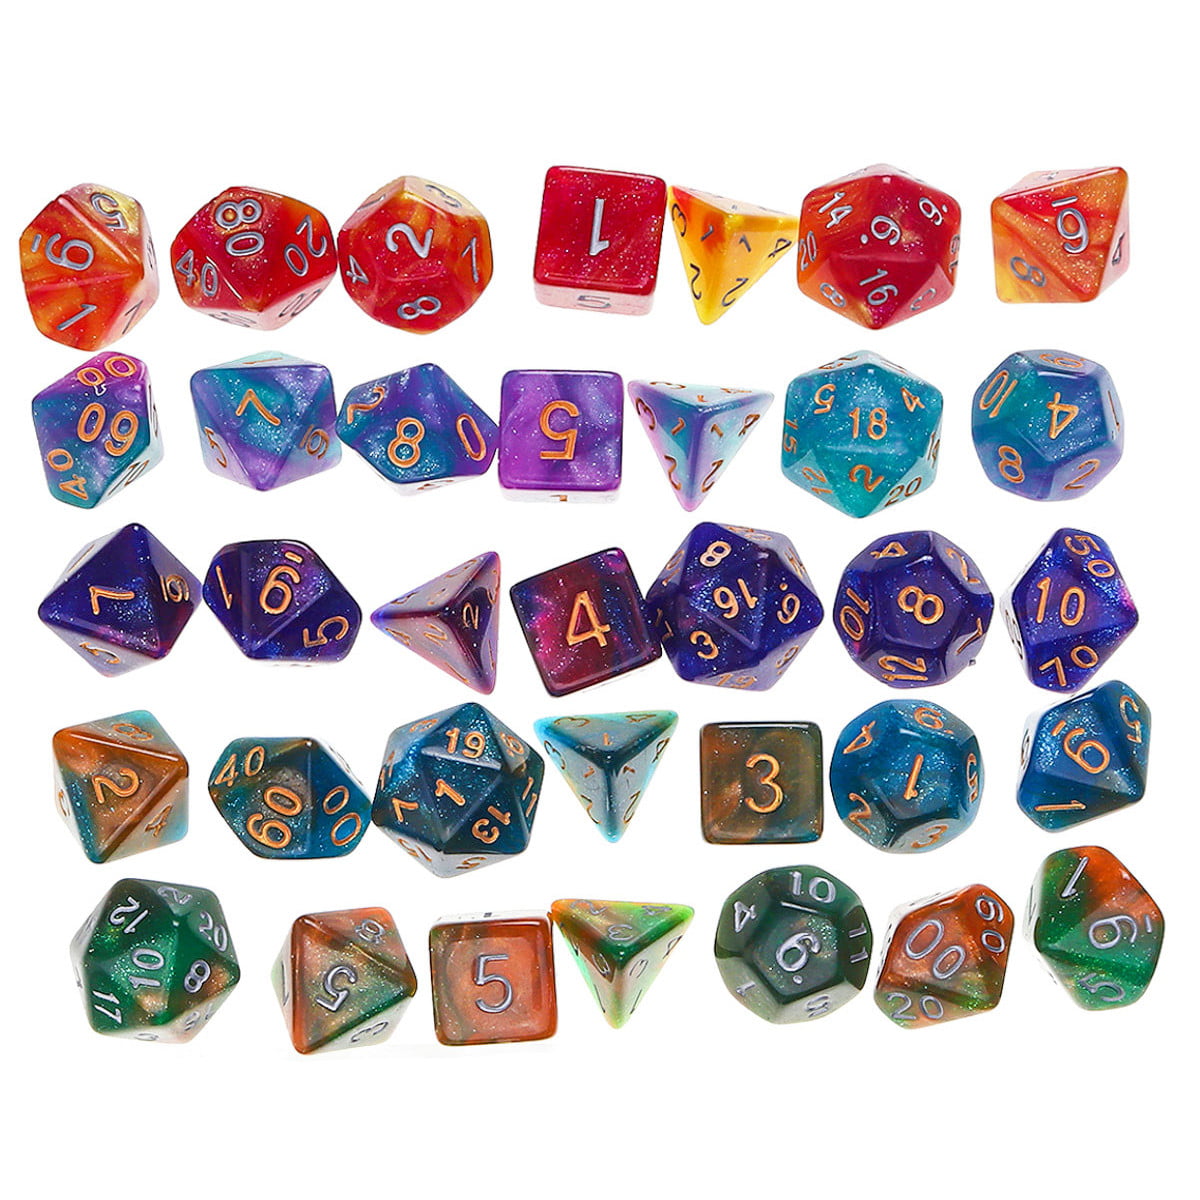 7pc Acrylic Polyhedral Dice D4-D20 for  Game+Dice Cup #2 